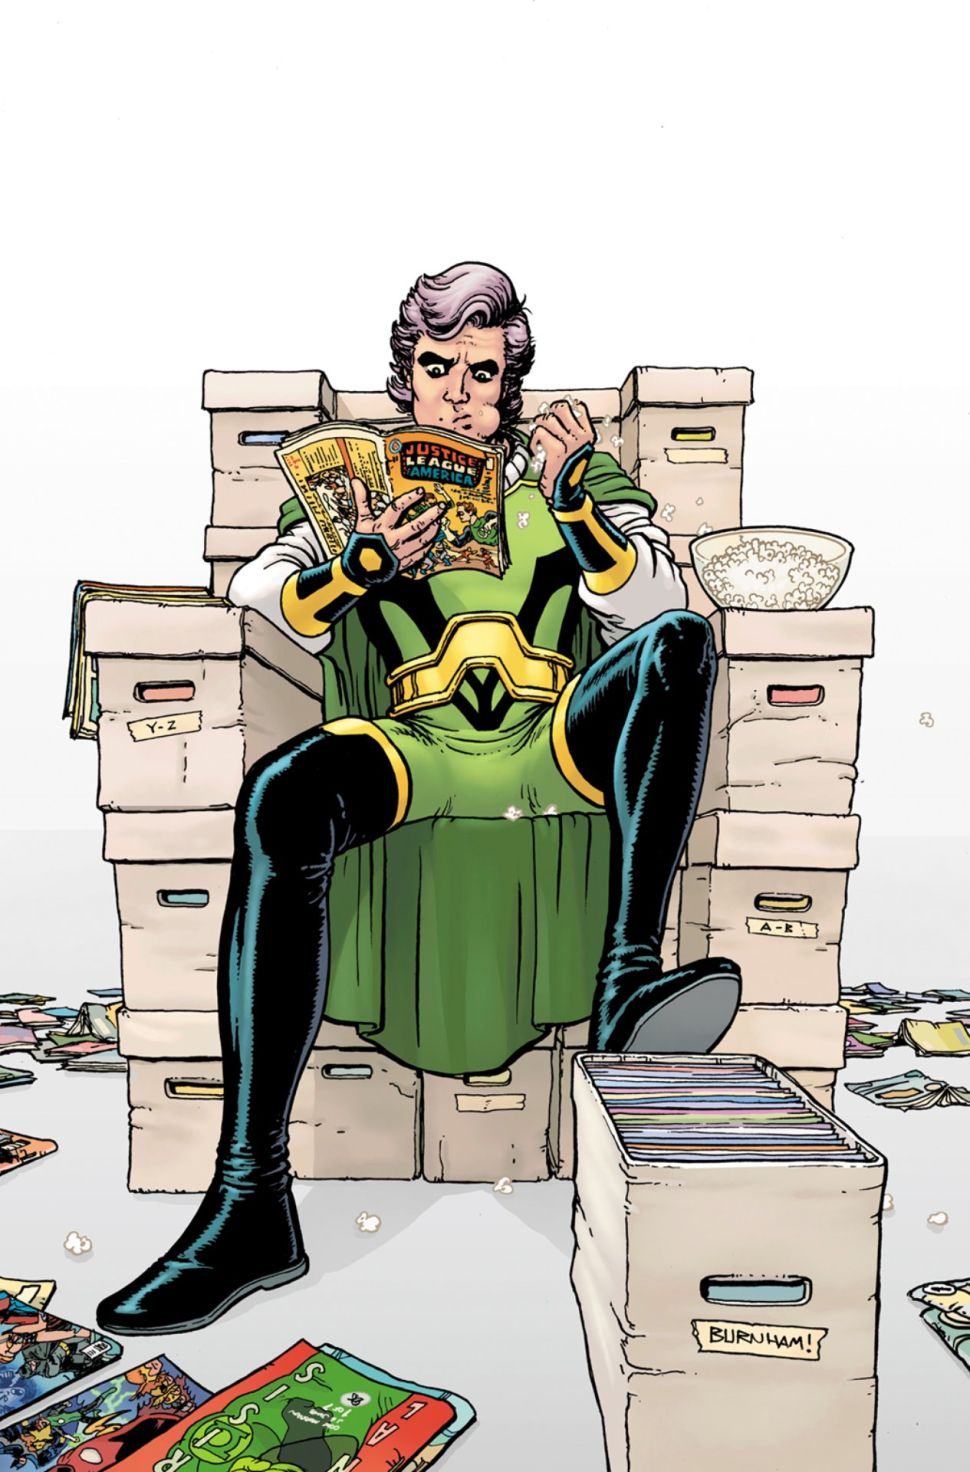 DC Road to Dark Crisis cover art Pariah is sitting on a chair made out of filing boxes as he reads a comic and eats popcorn